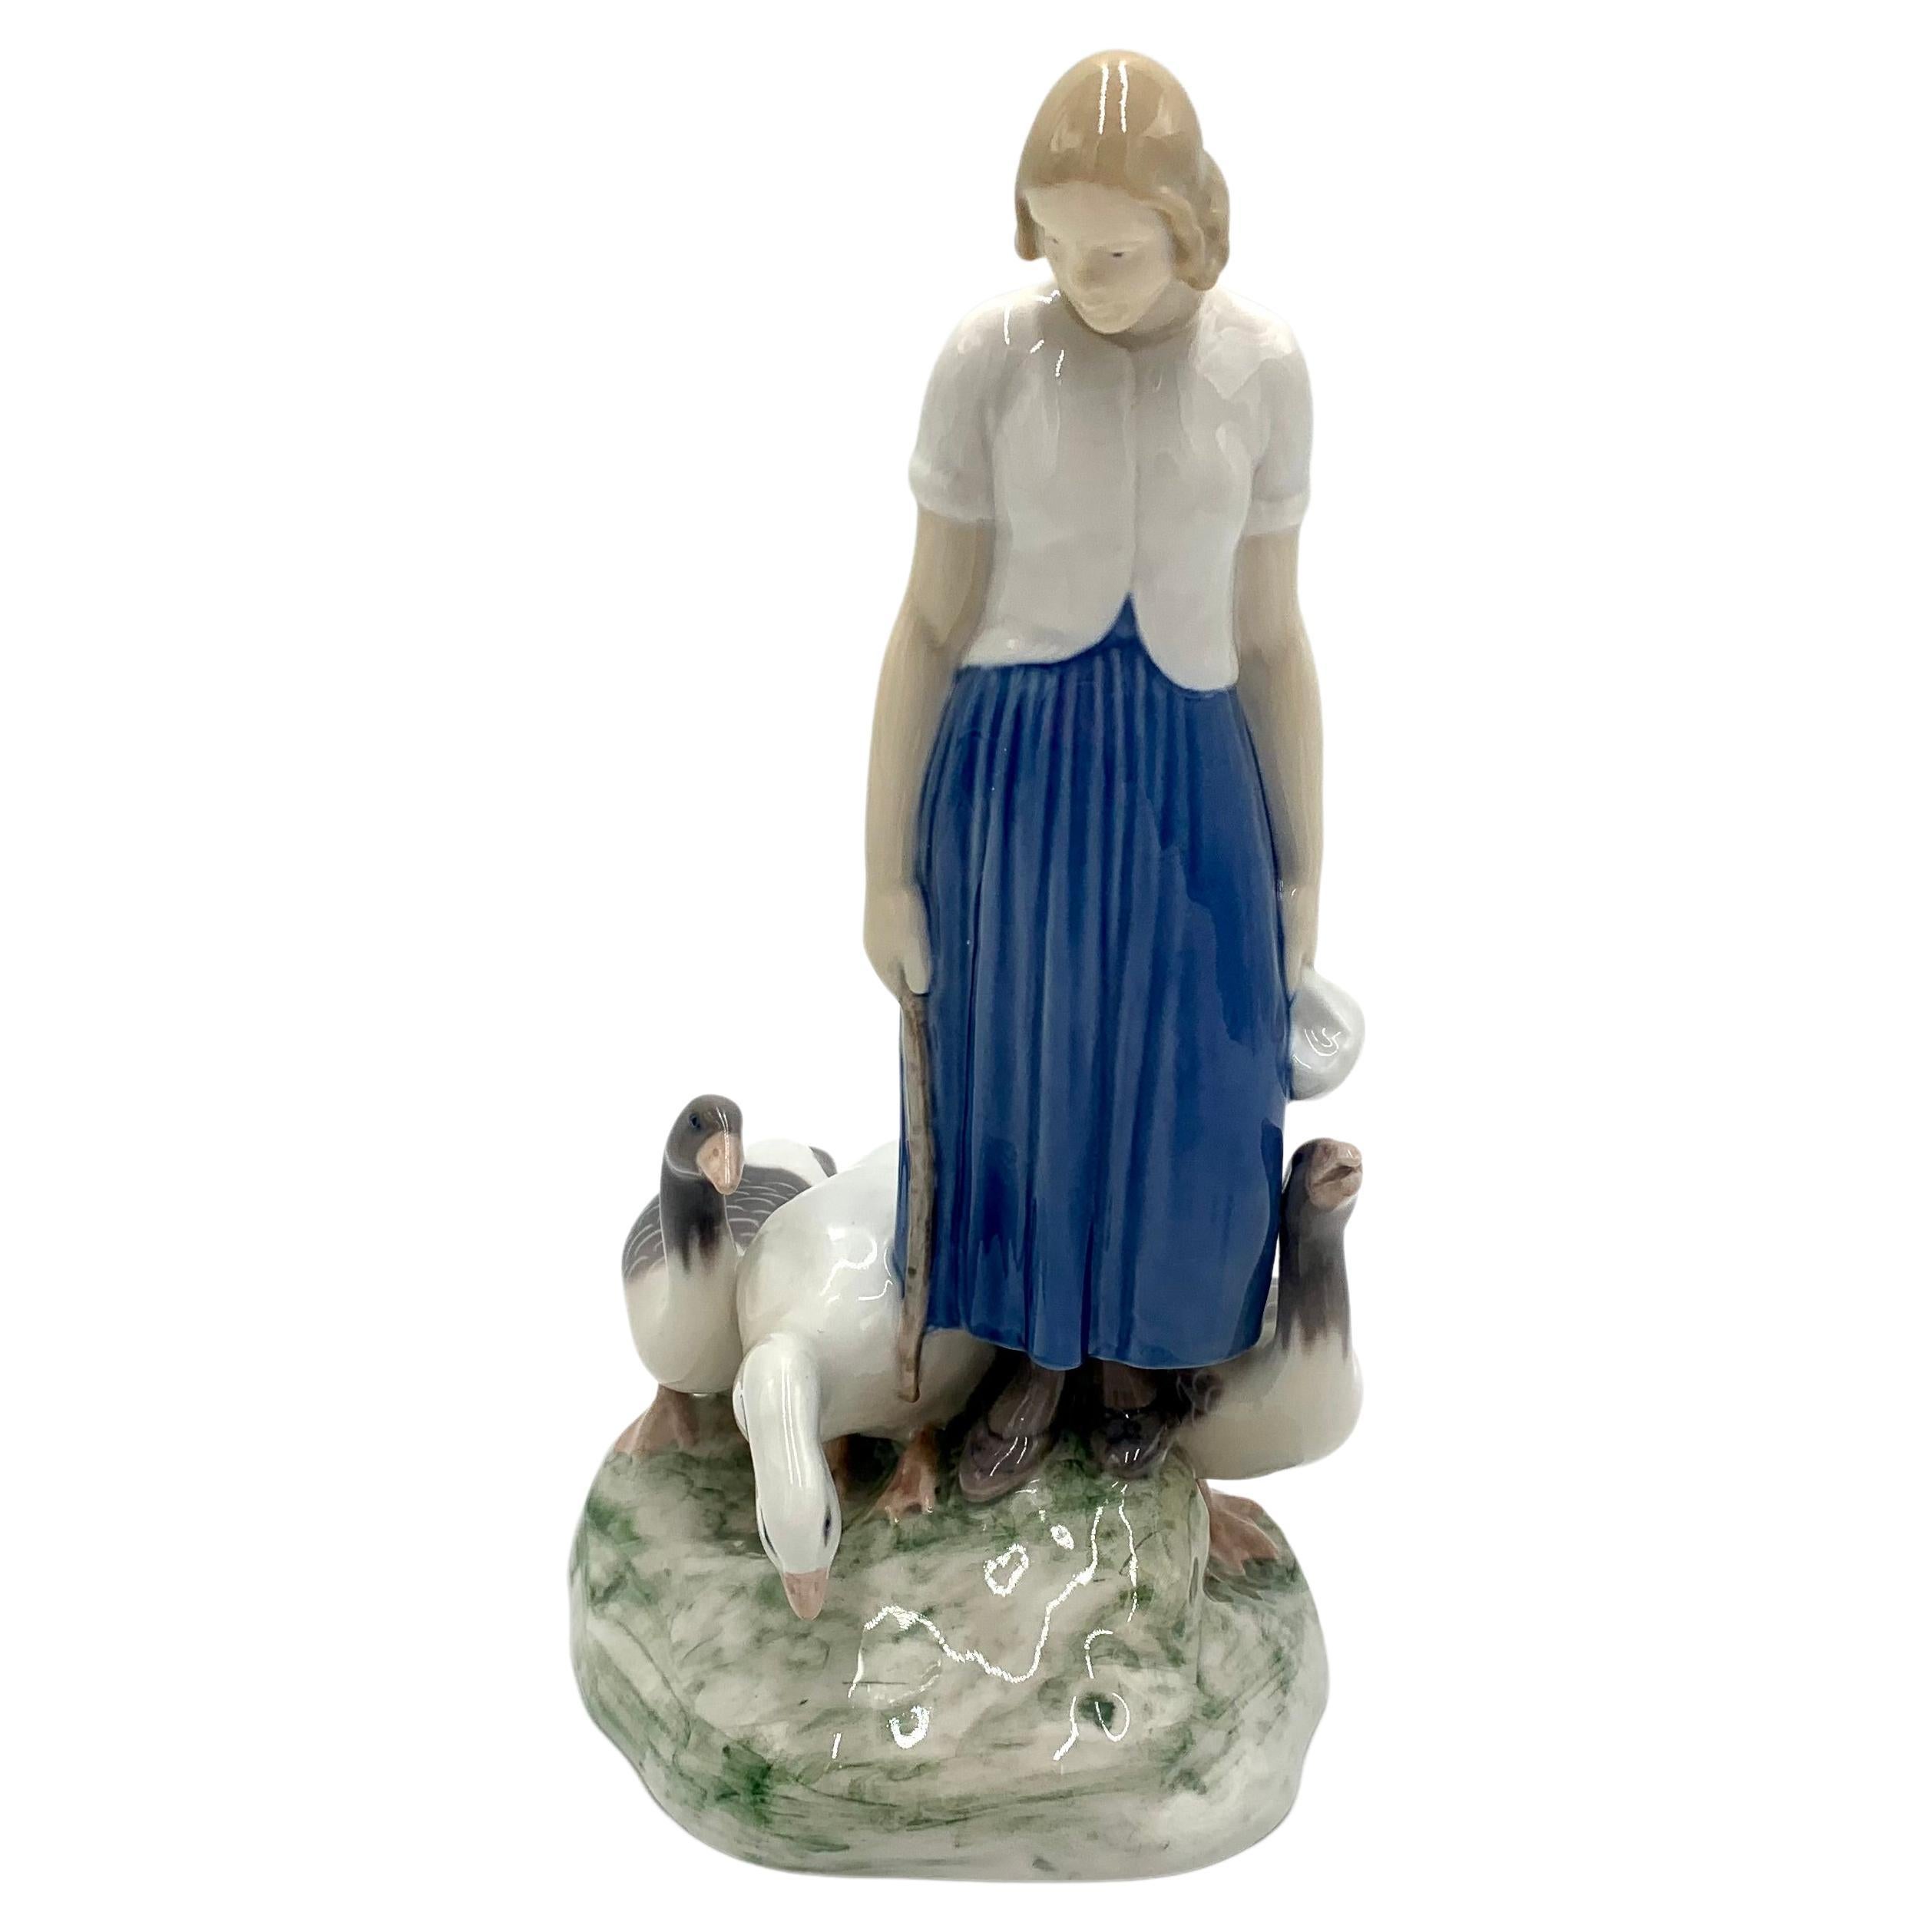 Porcelain Figurine of a Woman with Geese, Bing & Grondahl, Denmark, 1950s / 1960